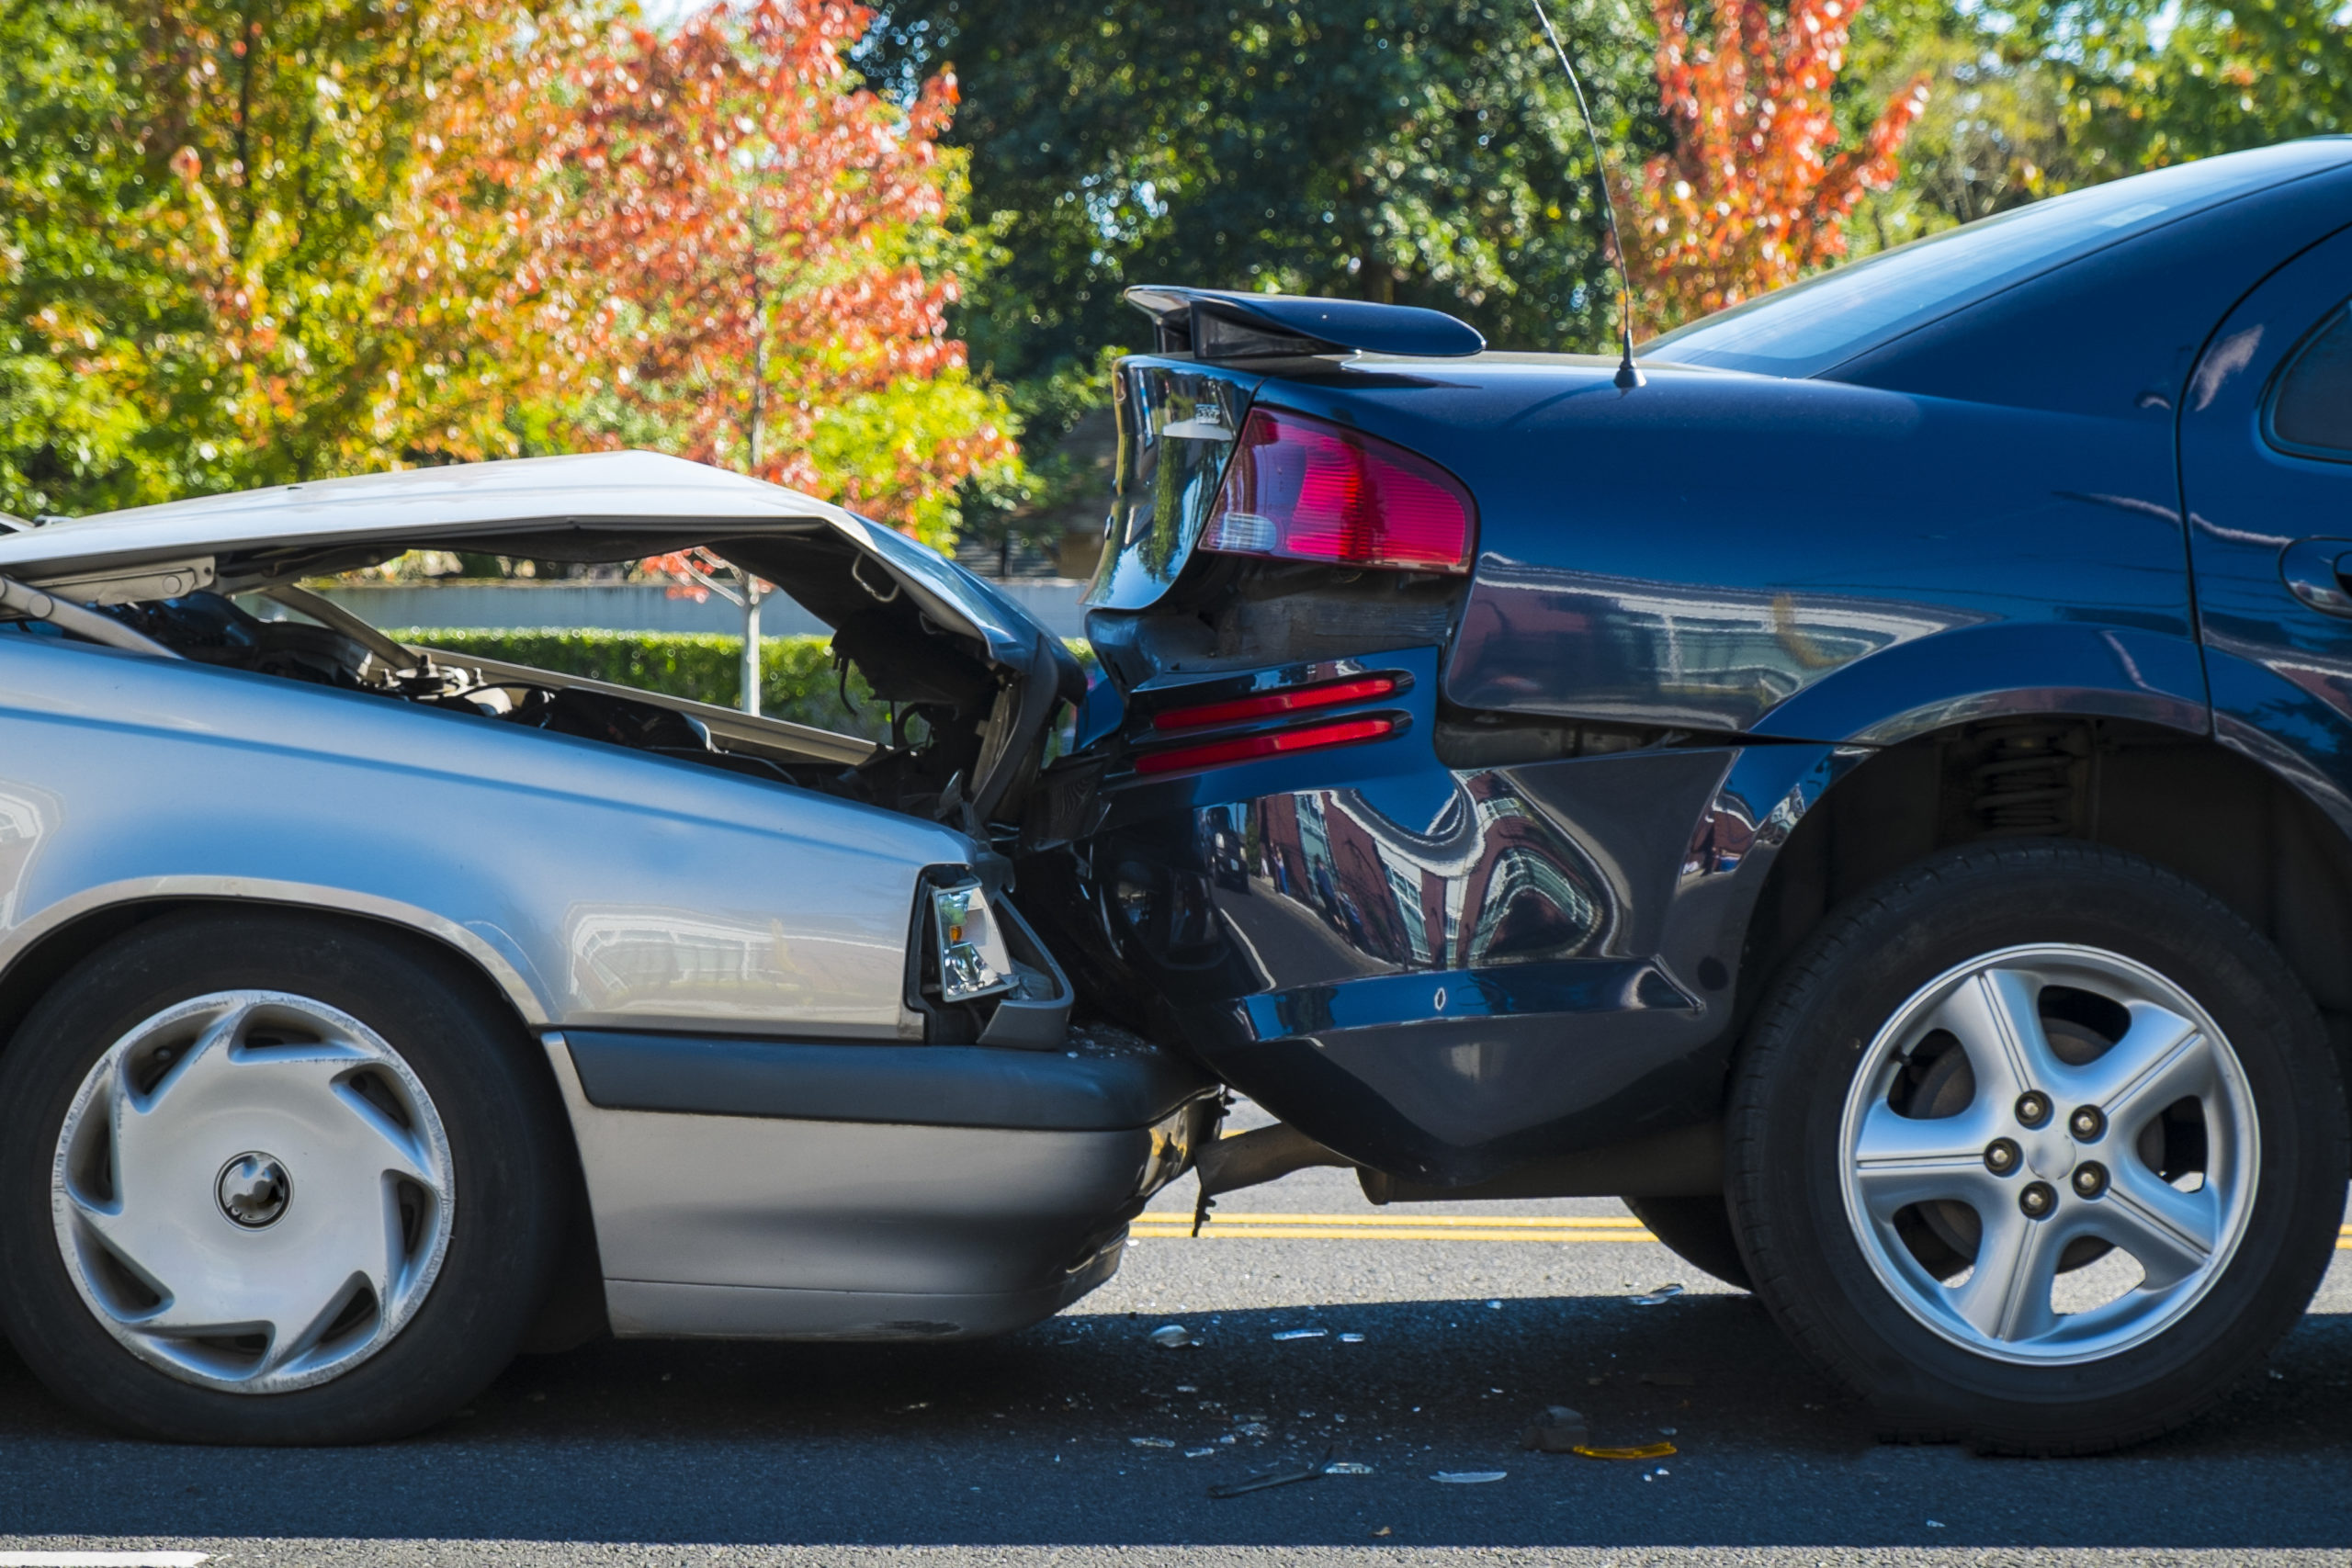 How To Negotiate A Higher Car Accident Settlement